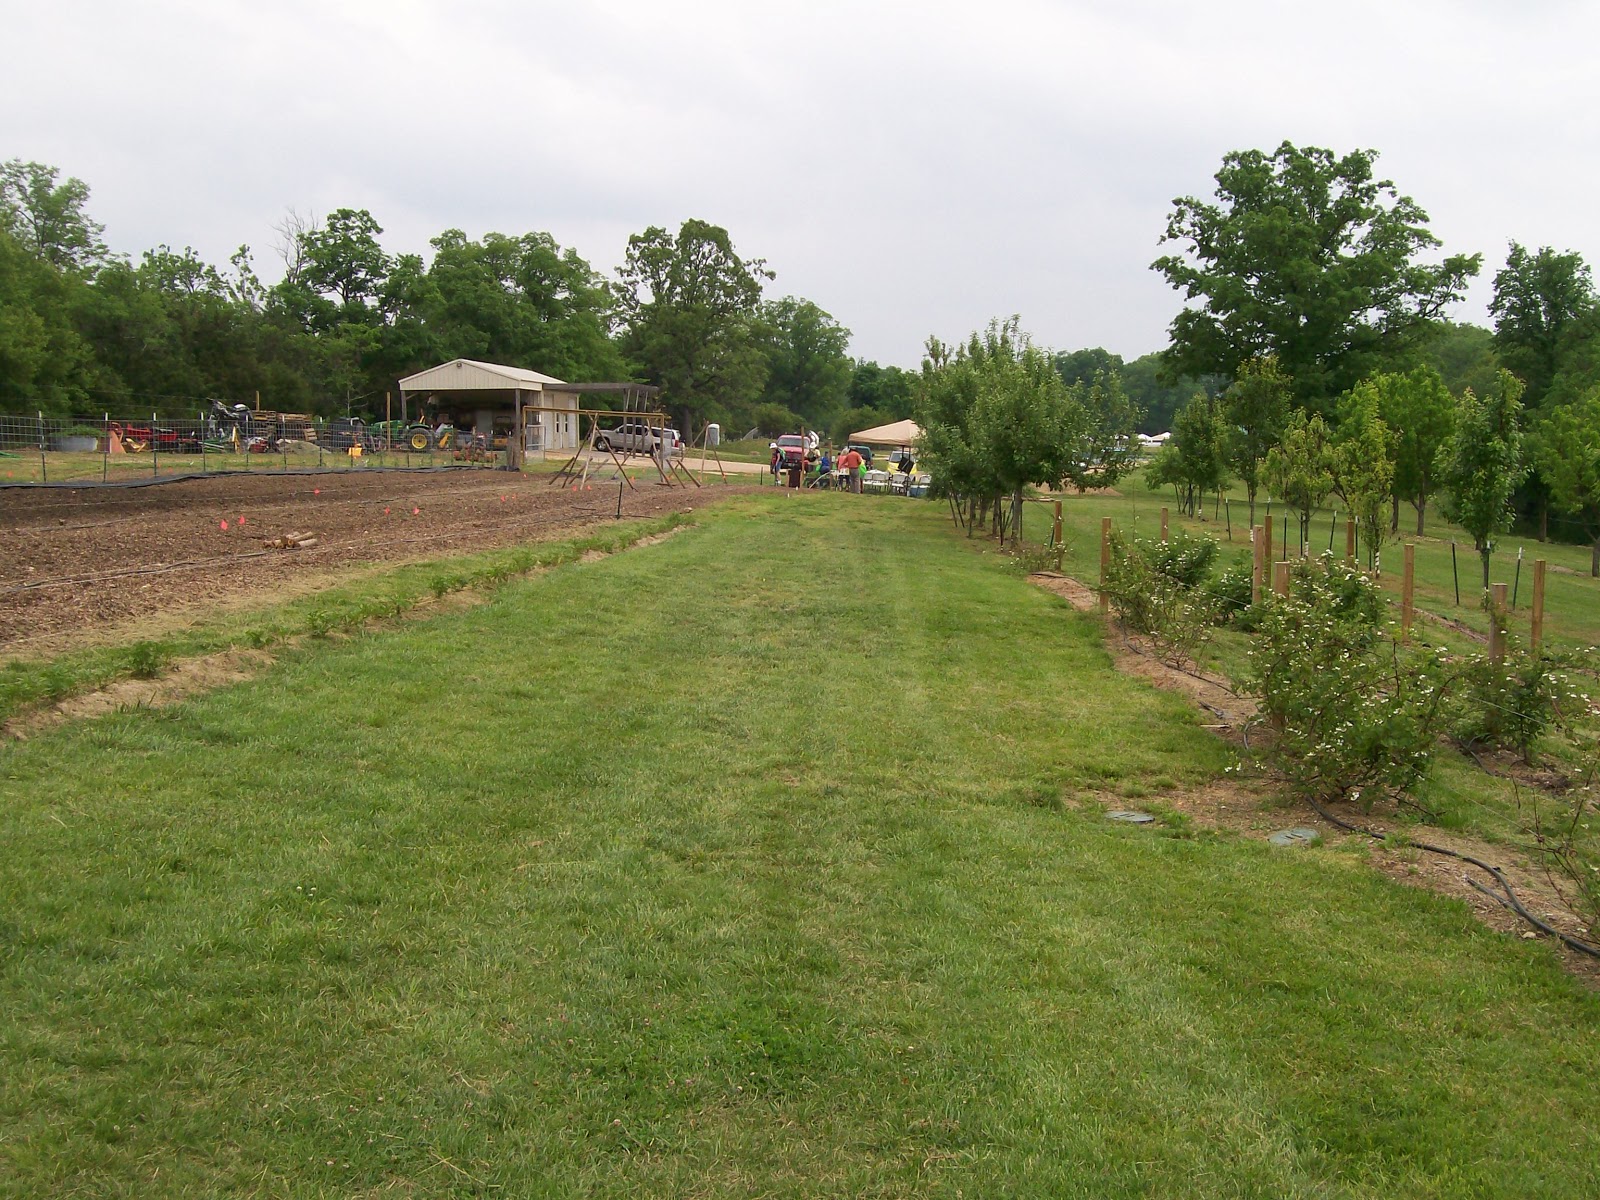 View of Vegetable Garden and fruit trees from far end of fenced area